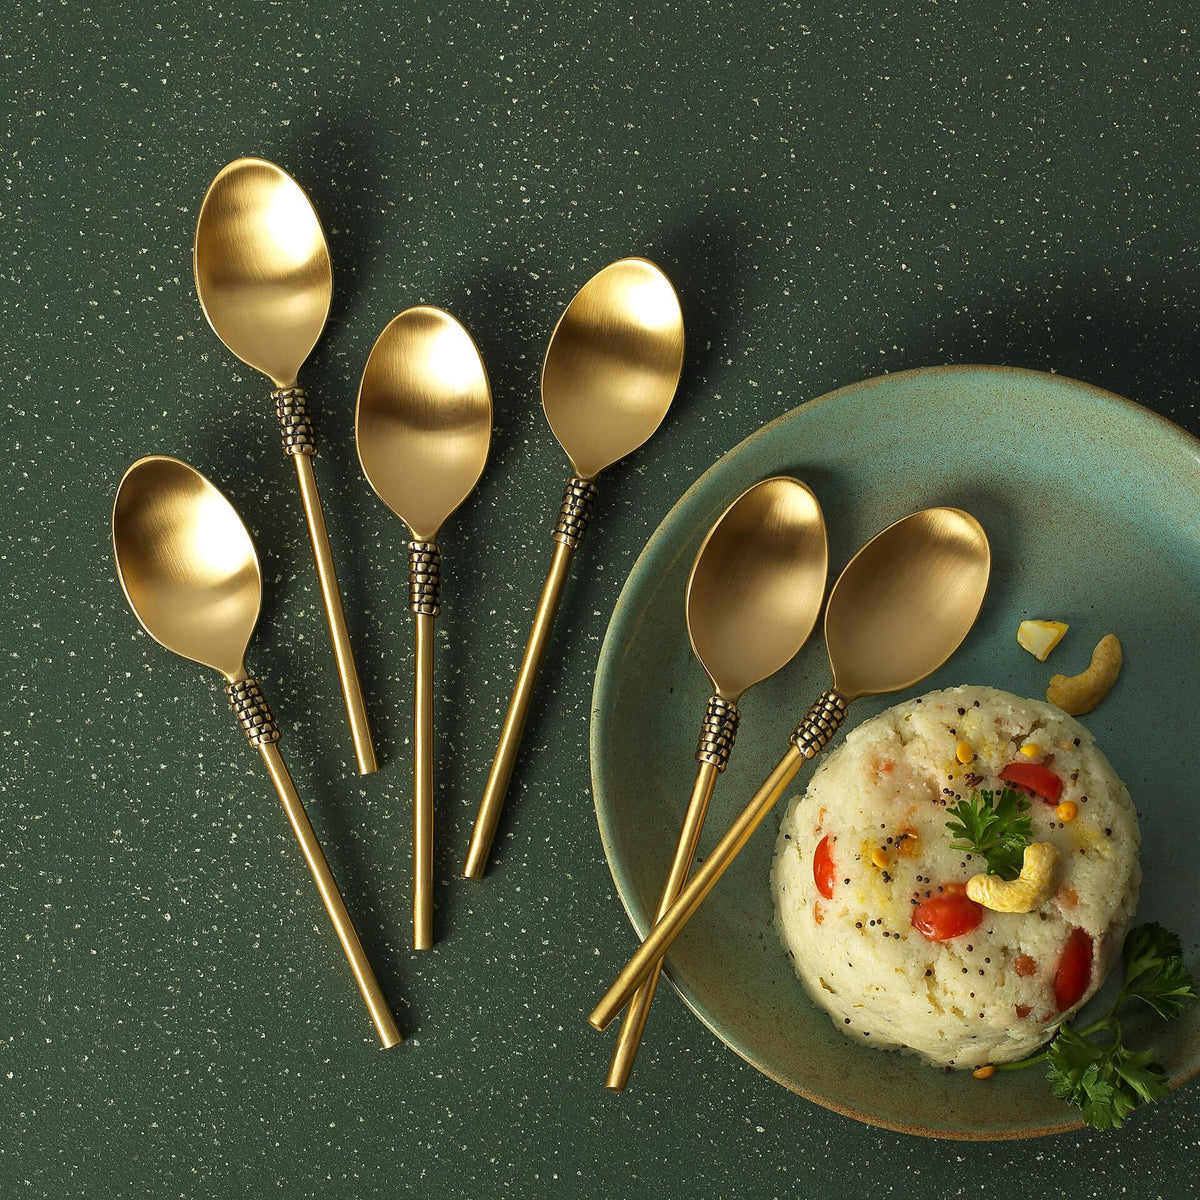 Masai Table Spoon Set of 6 - ellementry